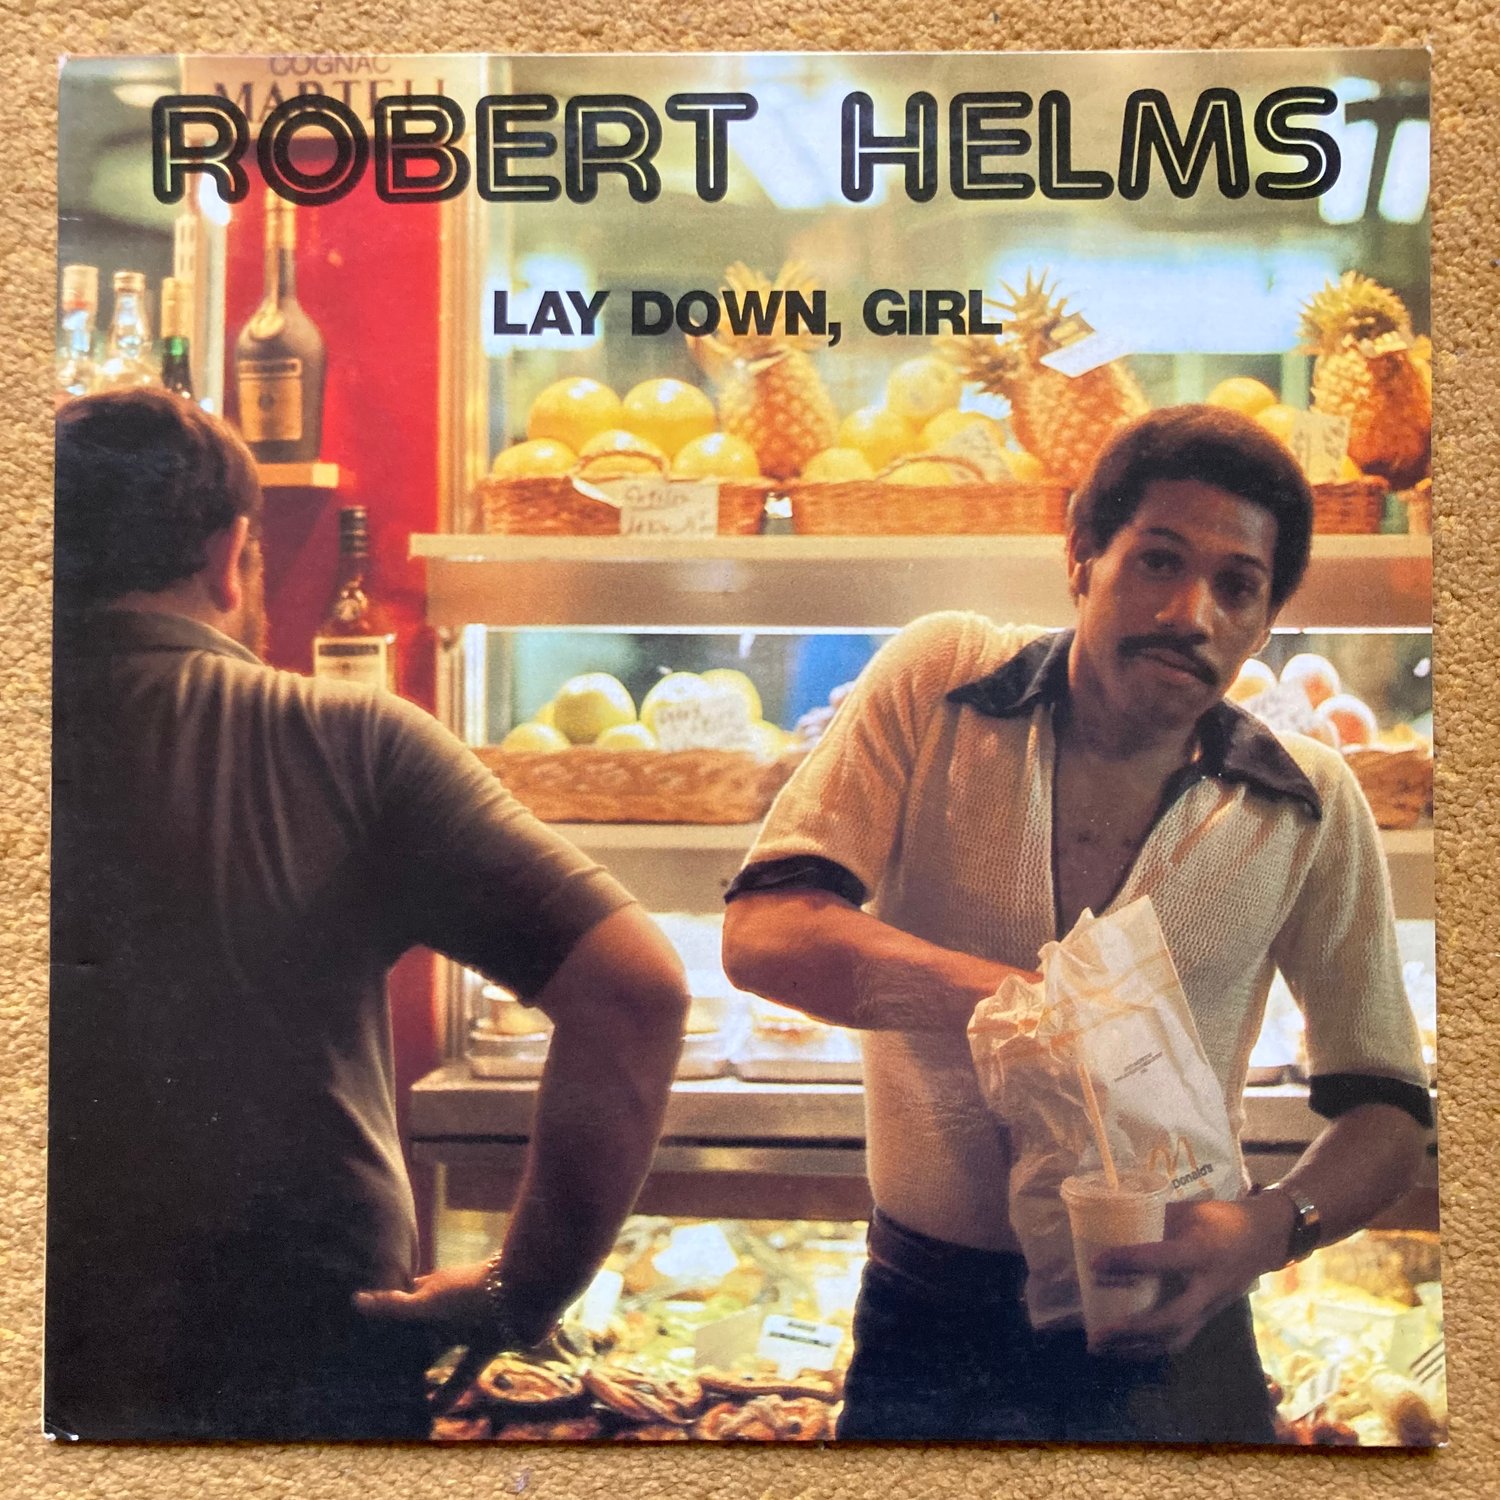 Image of ROBERT HELMS - Lay Down, Girl (FM Productions, 1980)